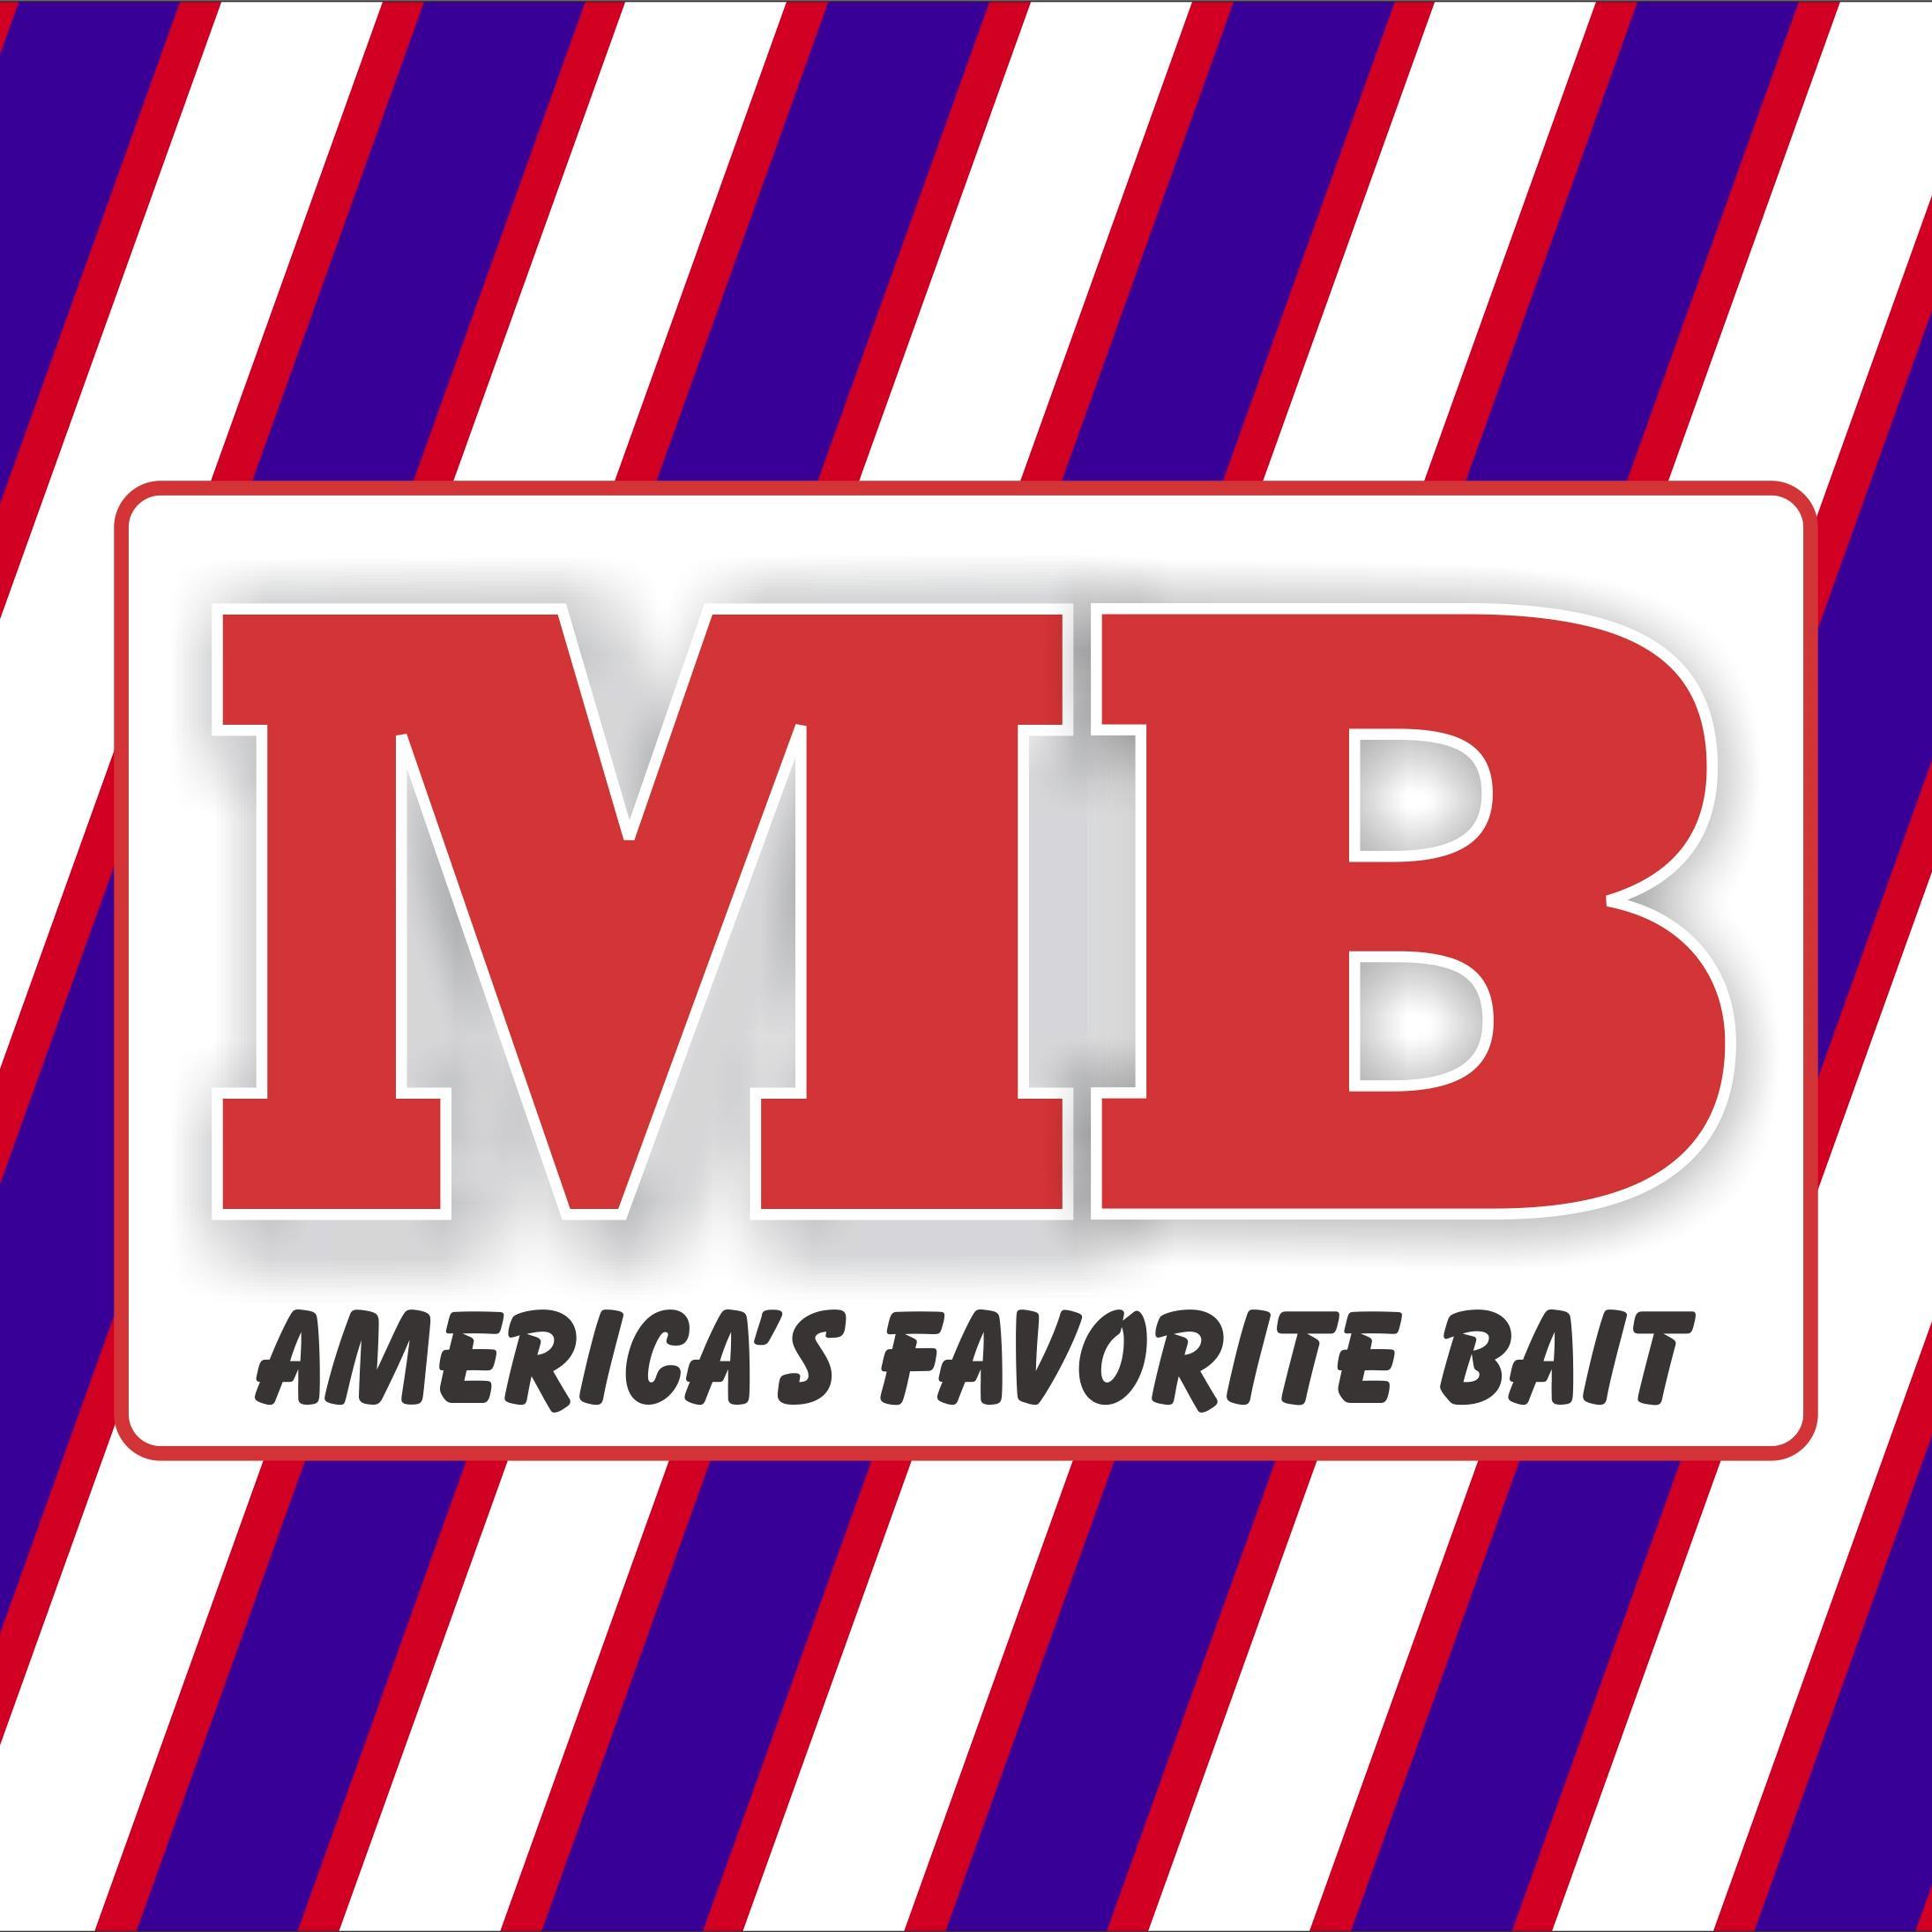 Magic Bait C0. is a family owned & operated manufacturing company in the sport fishing industry since 1970.